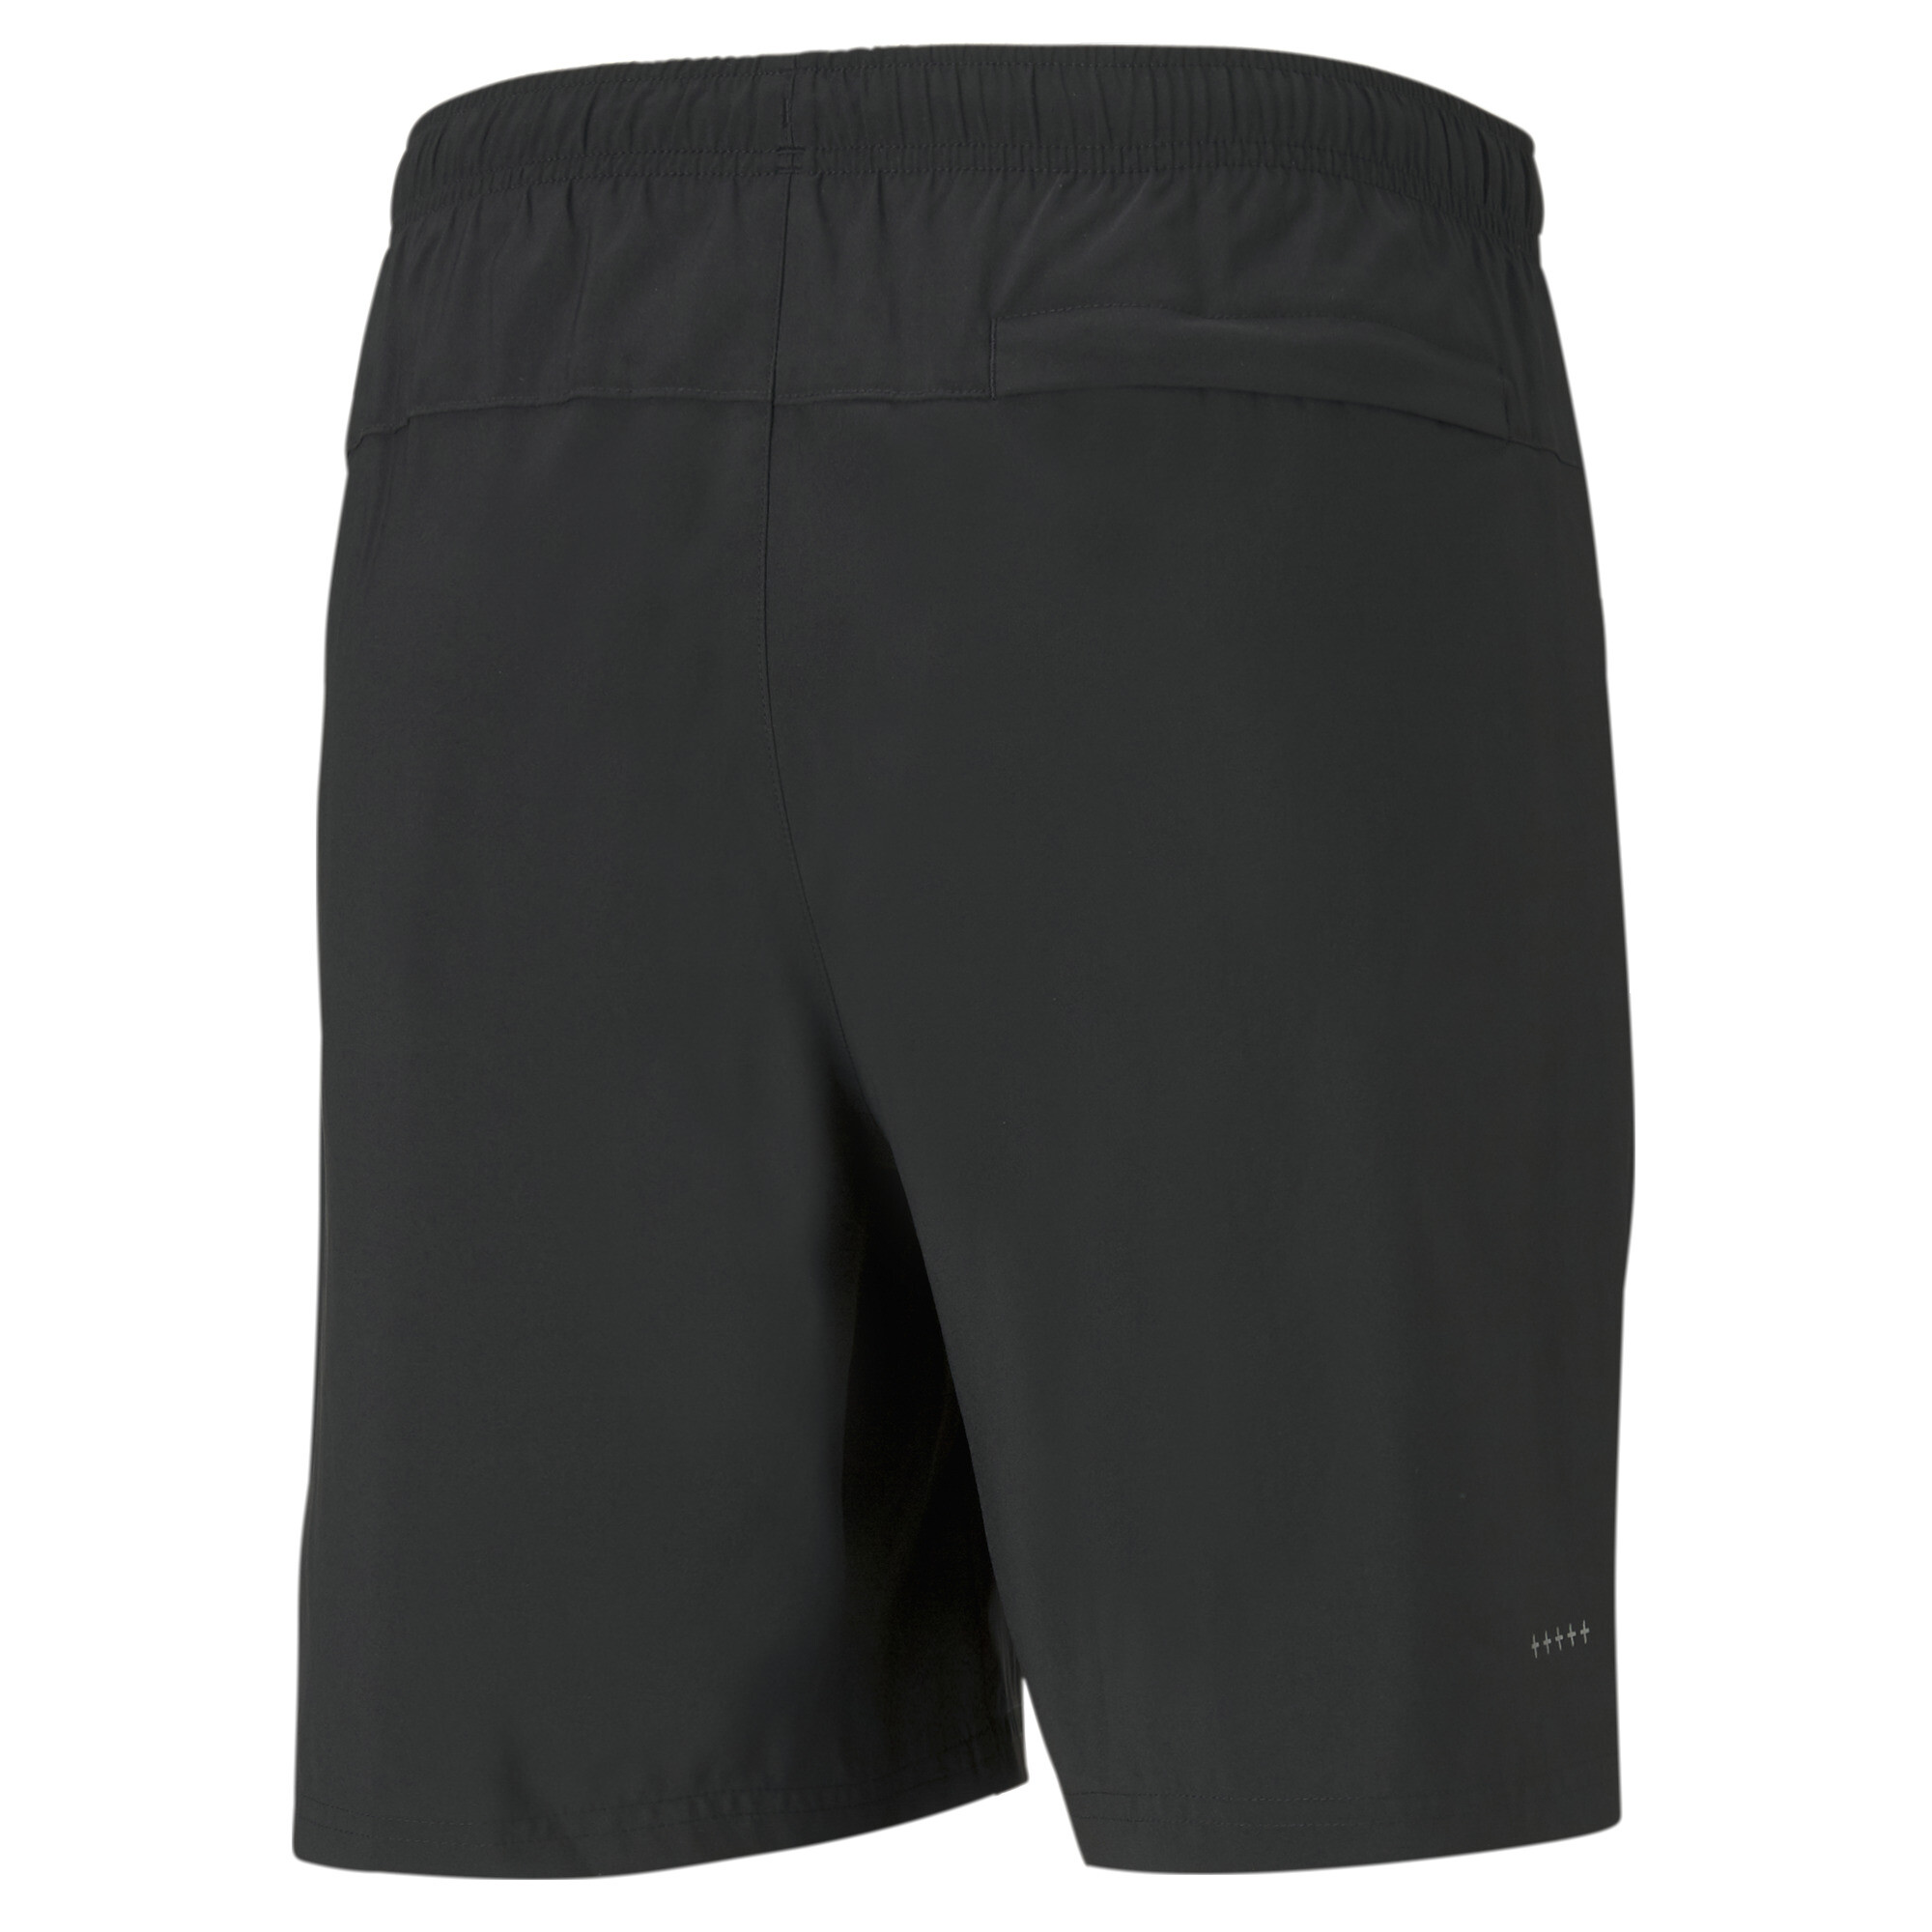 Men's PUMA Favourite Woven 7 Session Running Shorts In Black, Size XL